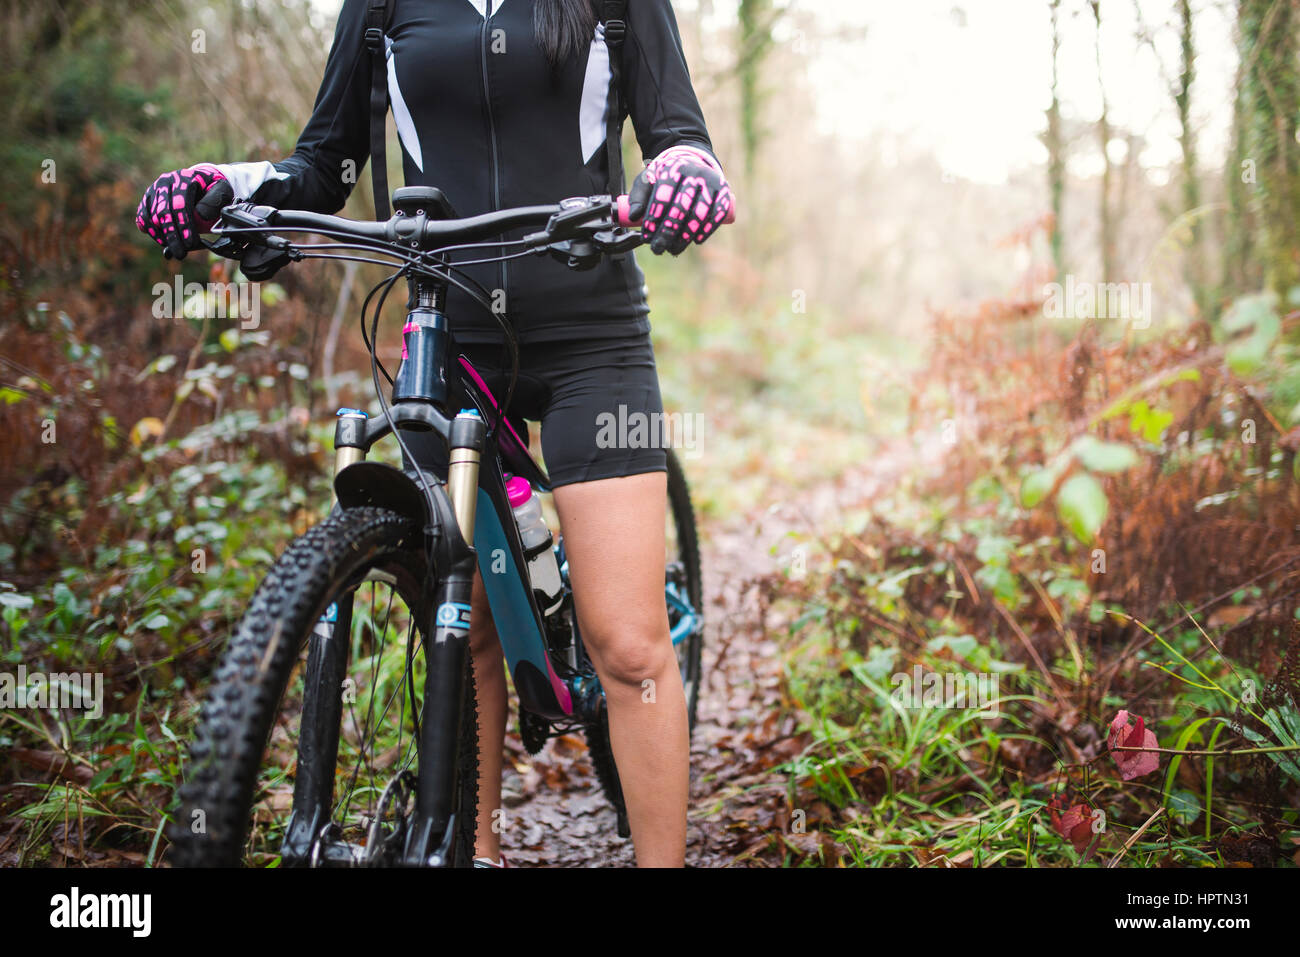 Female mountain biker on a trail in forest Stock Photo